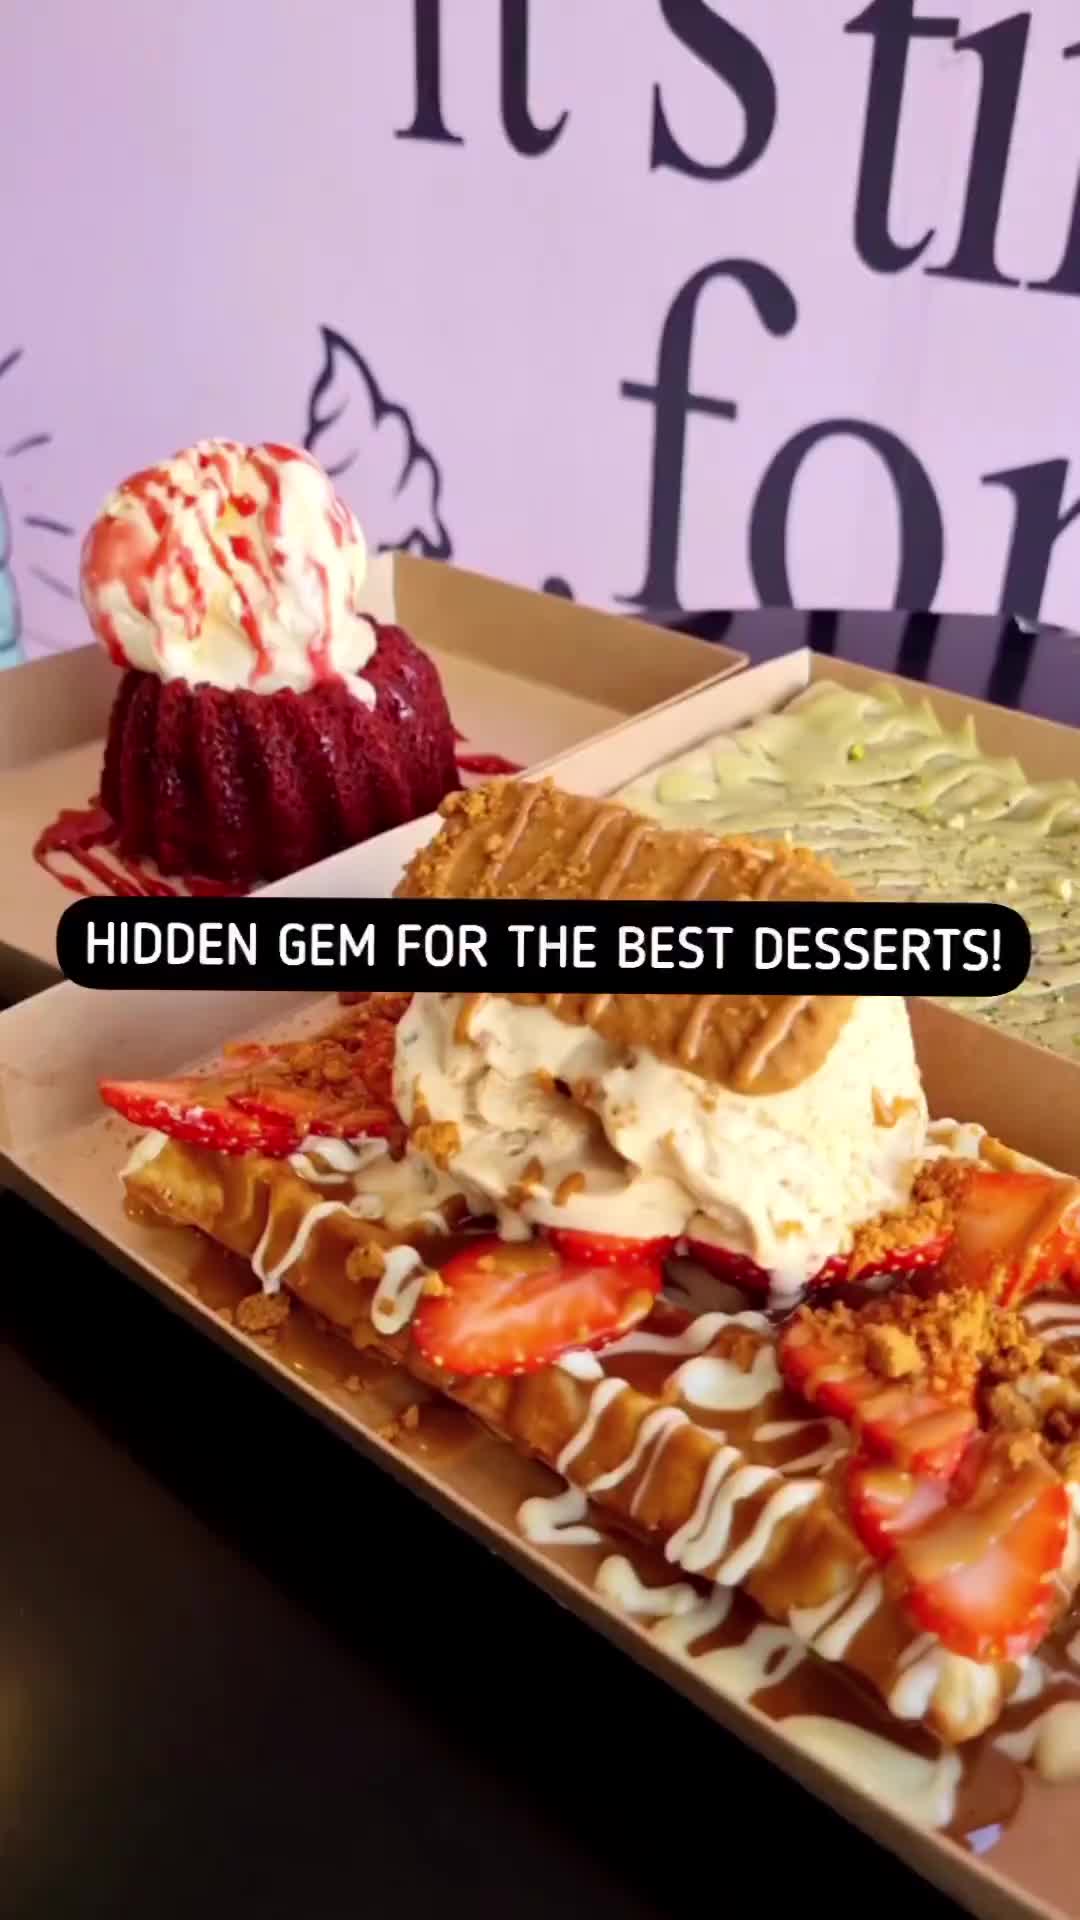 Indulge in Iceberry Ajman's Delicious Desserts - Free Delivery